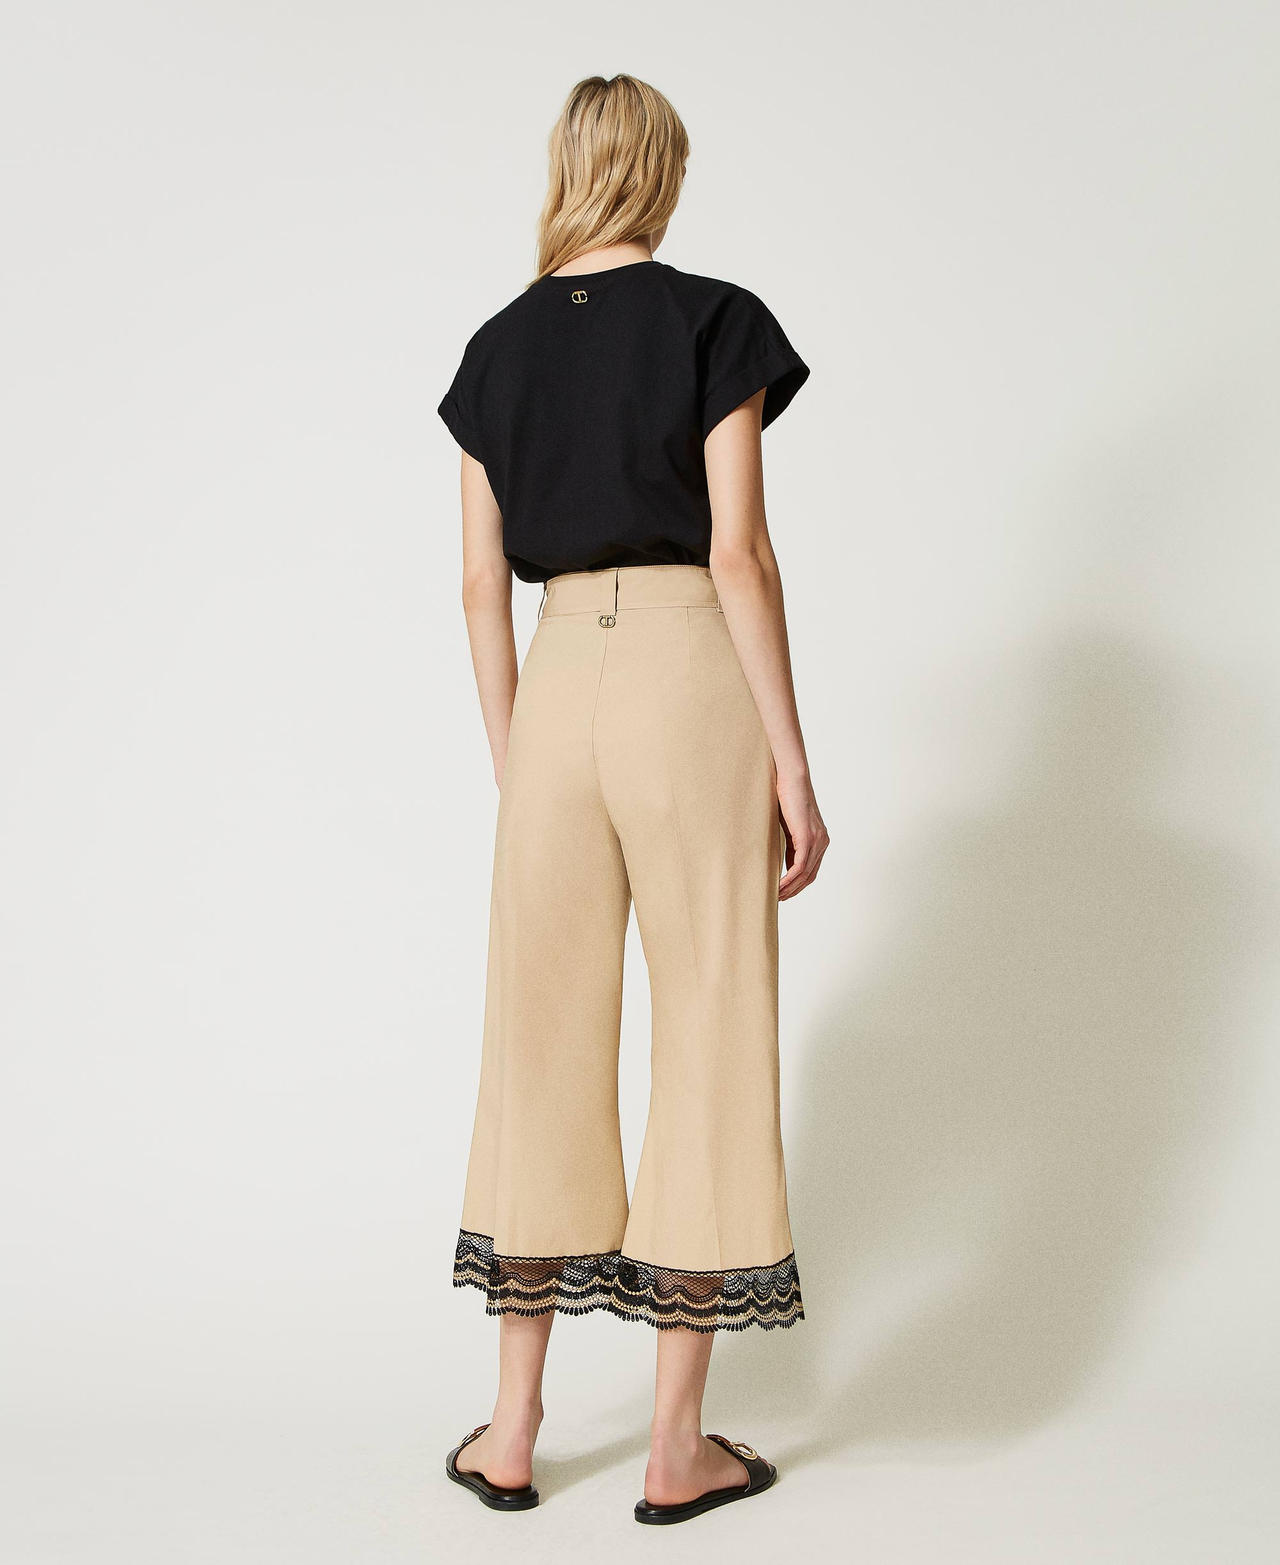 Cropped poplin trousers with two-tone lace Beige / Black Embroidery Woman 231TT2128-03